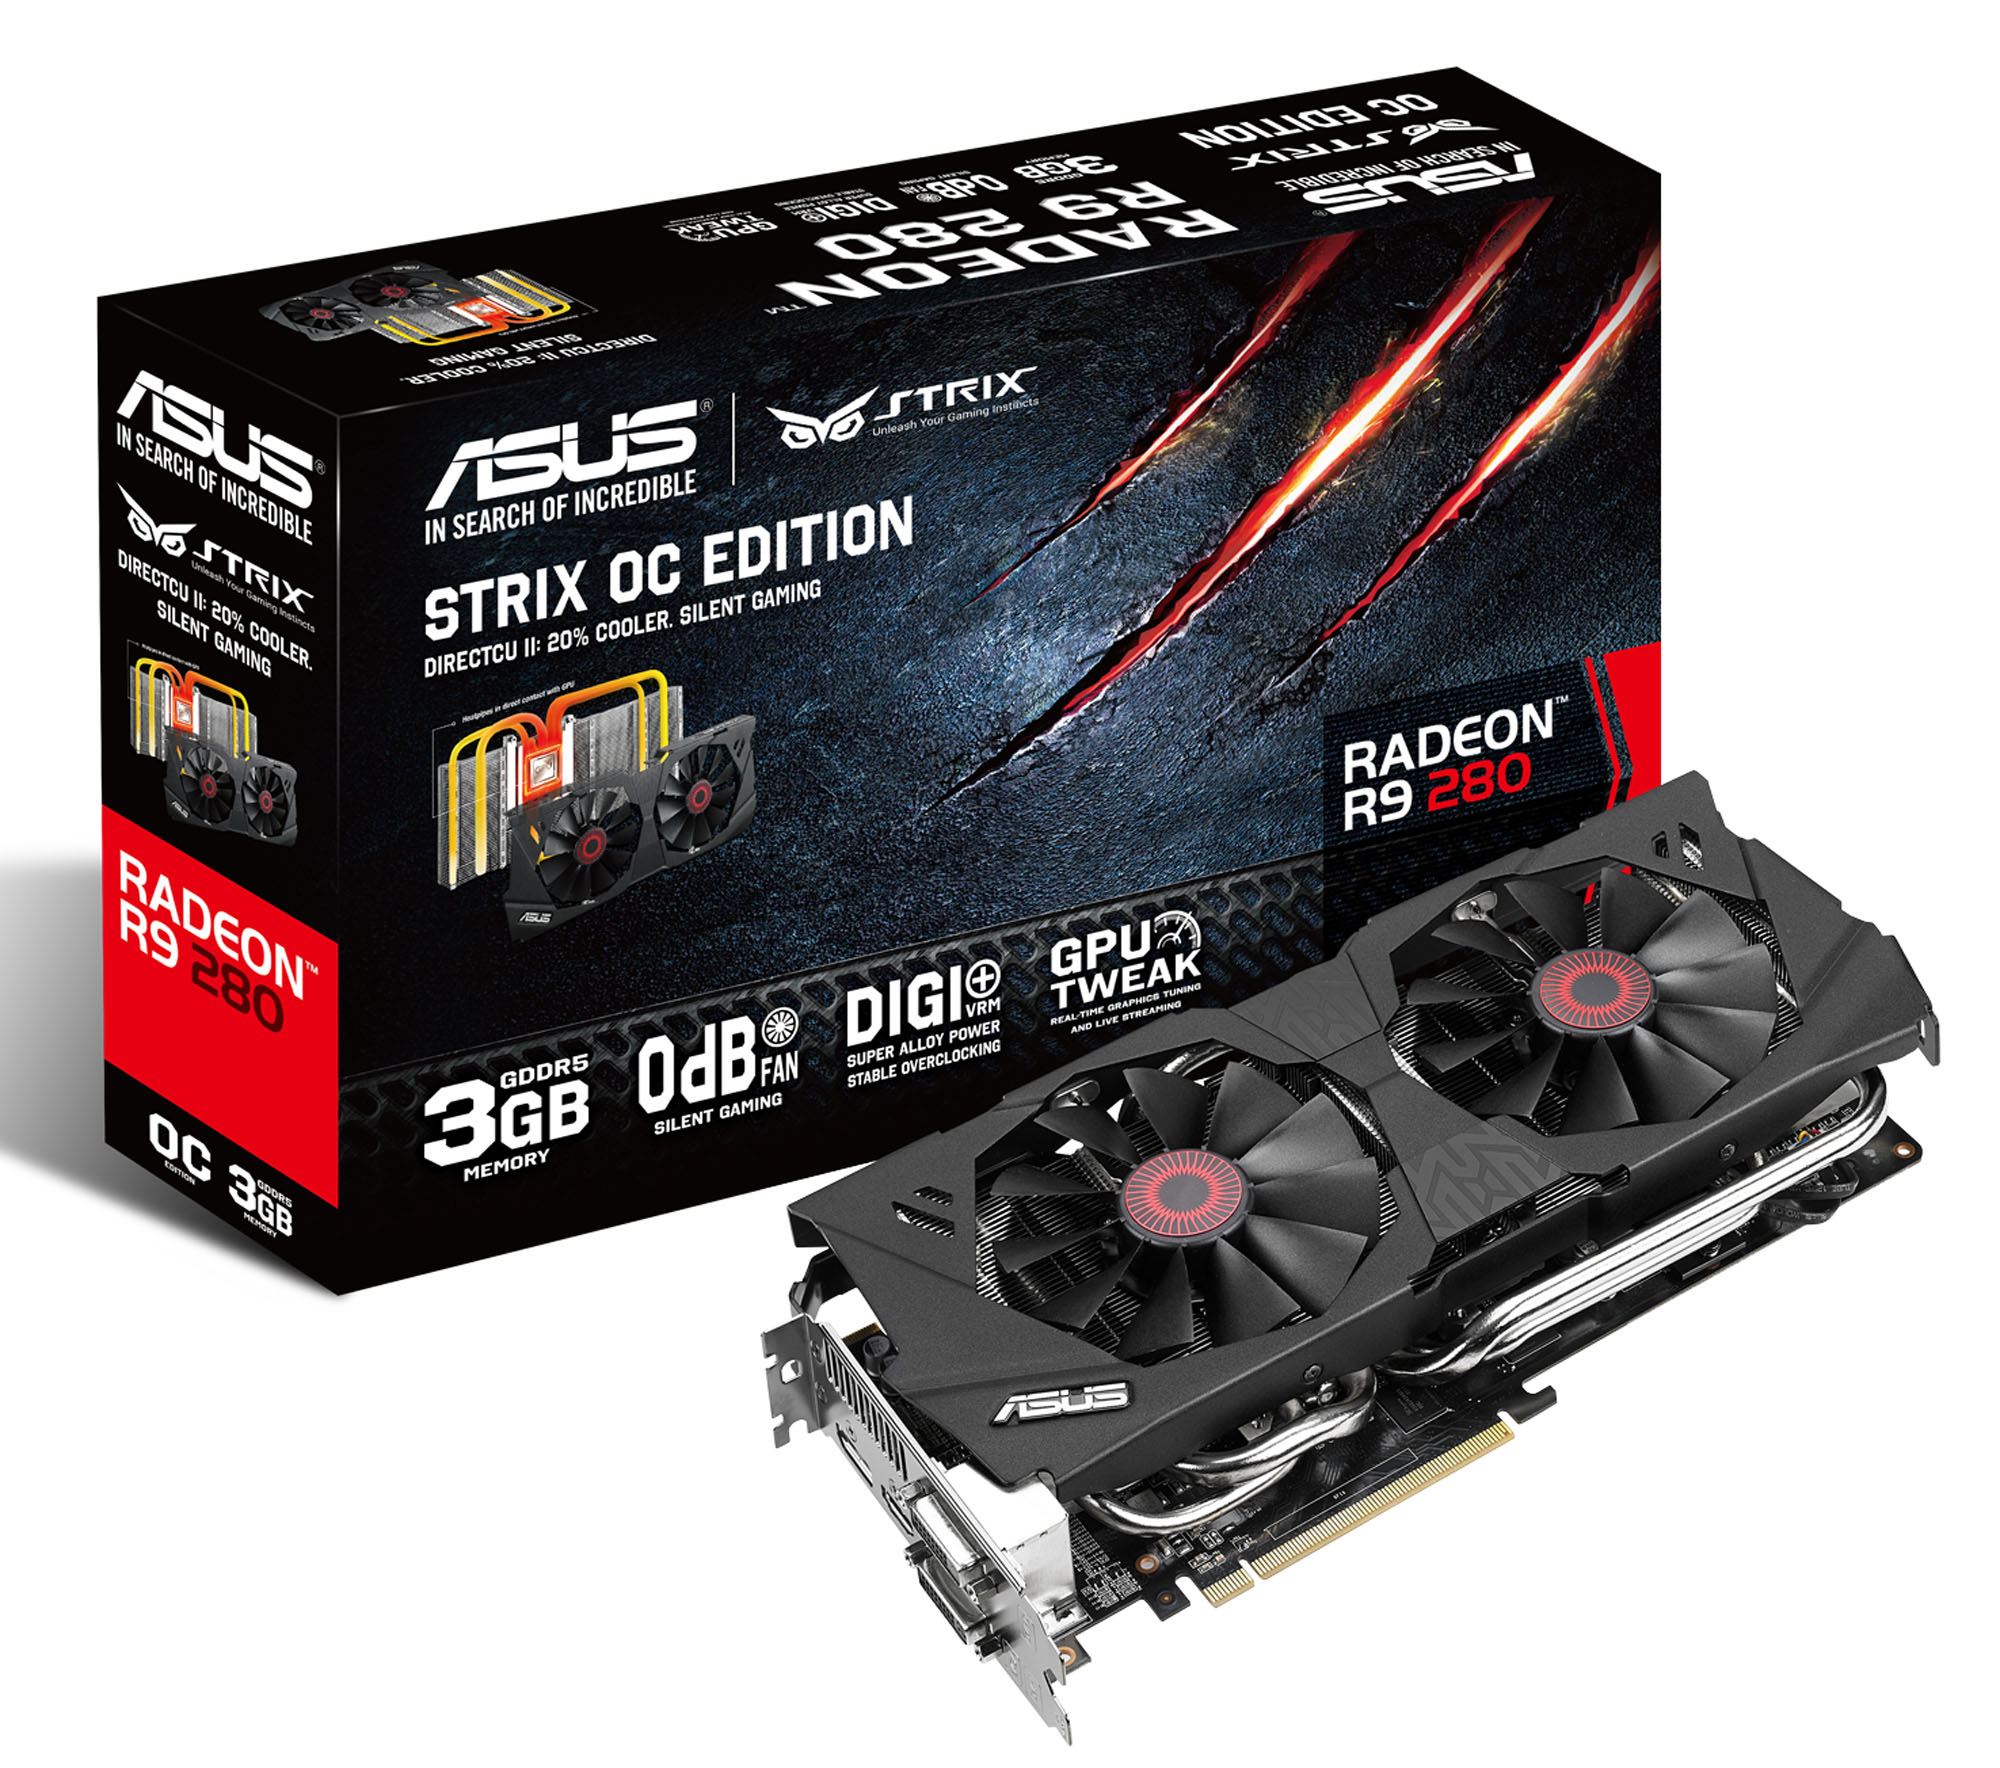 Media asset in full size related to 3dfxzone.it news item entitled as follows: ASUS annuncia le card non reference Strix R9 280 e Strix GTX 780 | Image Name: news21212_ASUS-Strix-R9-280_1.jpg